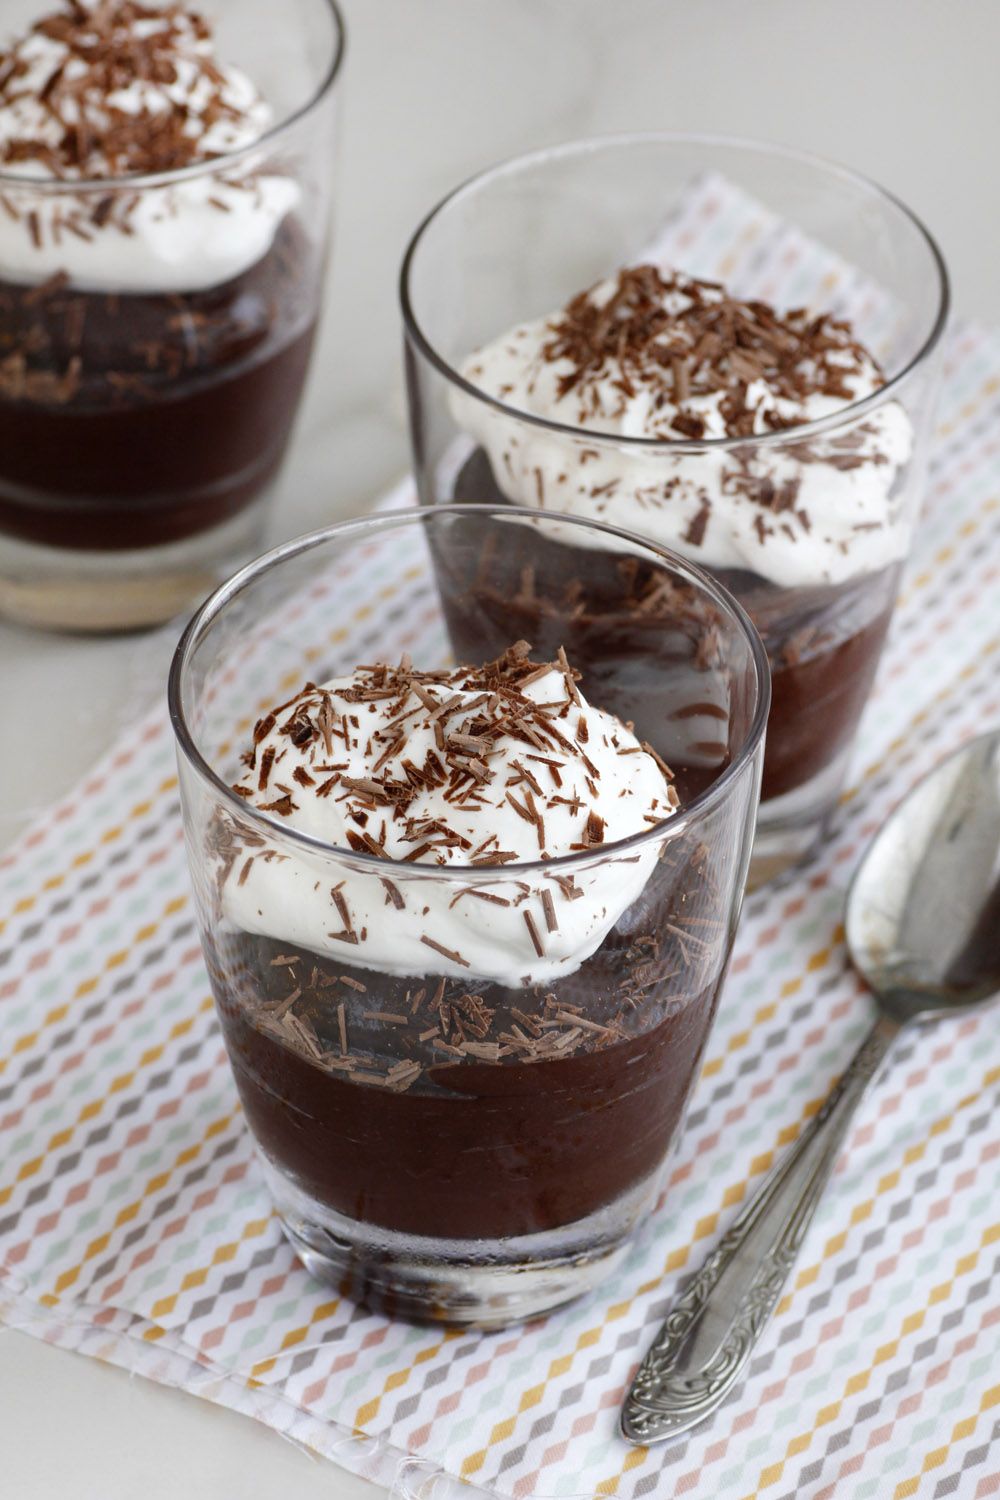 Vegan Chocolate Pudding with Peanut Butter and Whipped Cream